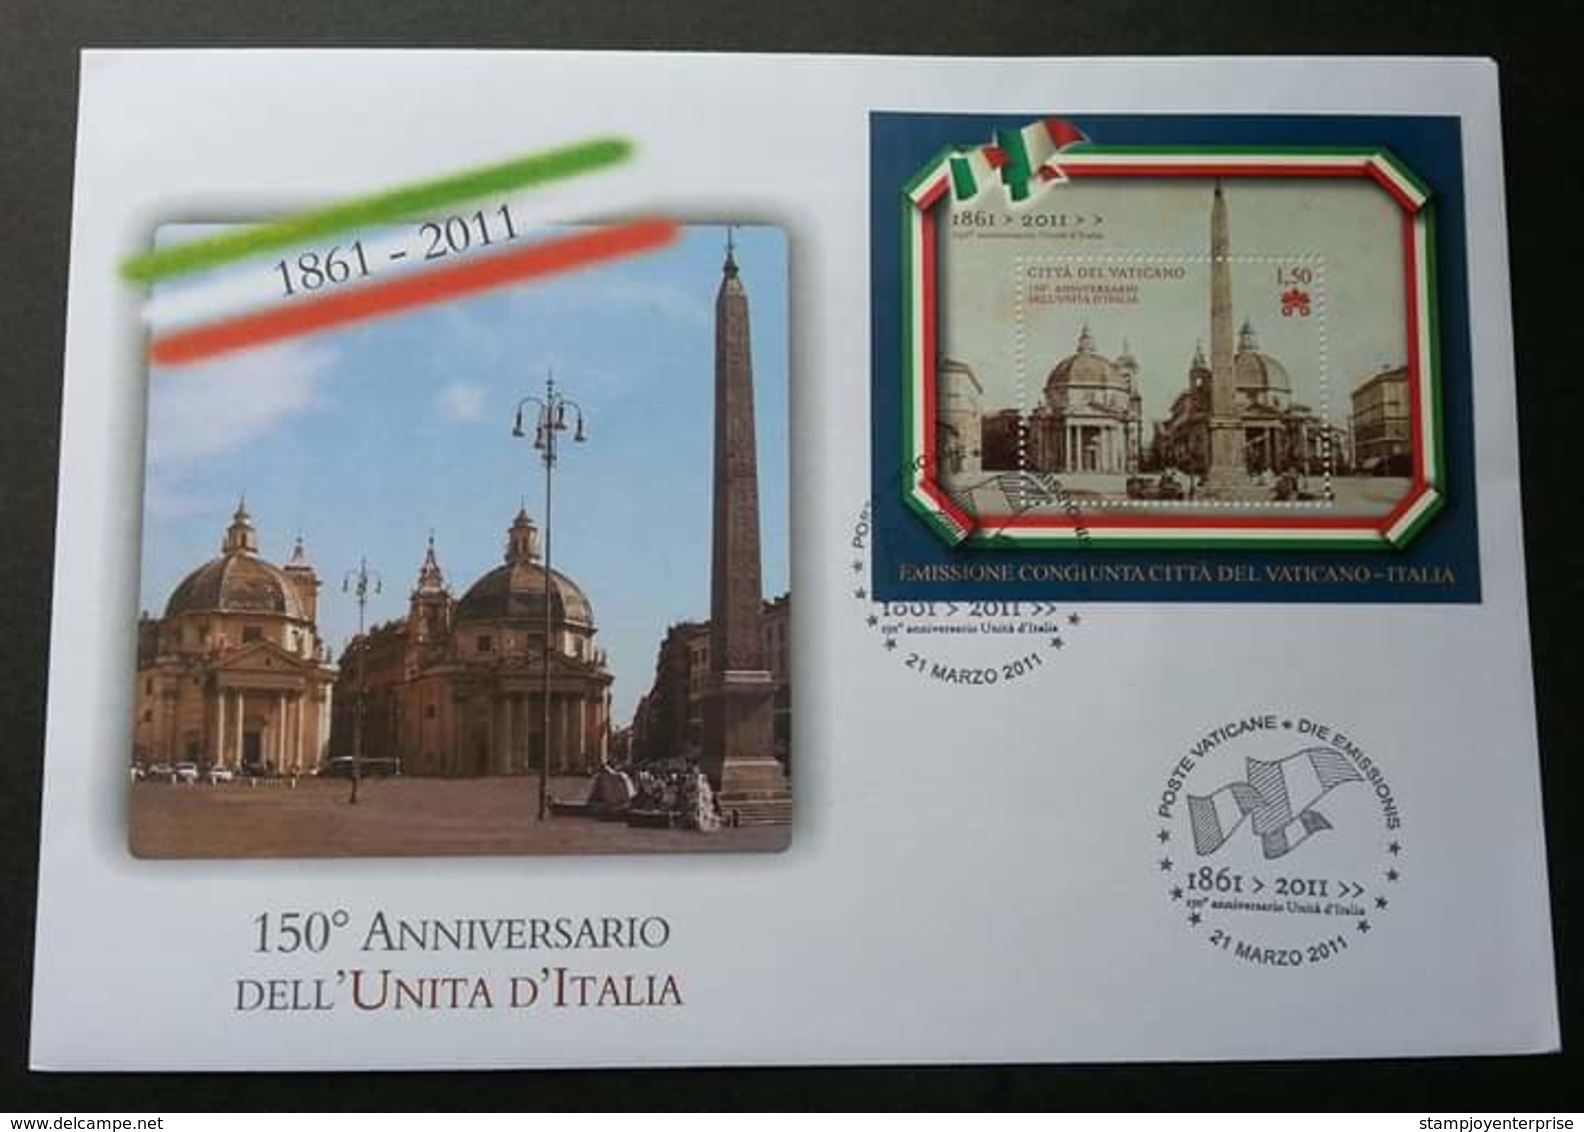 Vatican - Italy Joint Issue 150th Anniversary Of Italy Unity 2011 (miniature FDC) - Storia Postale